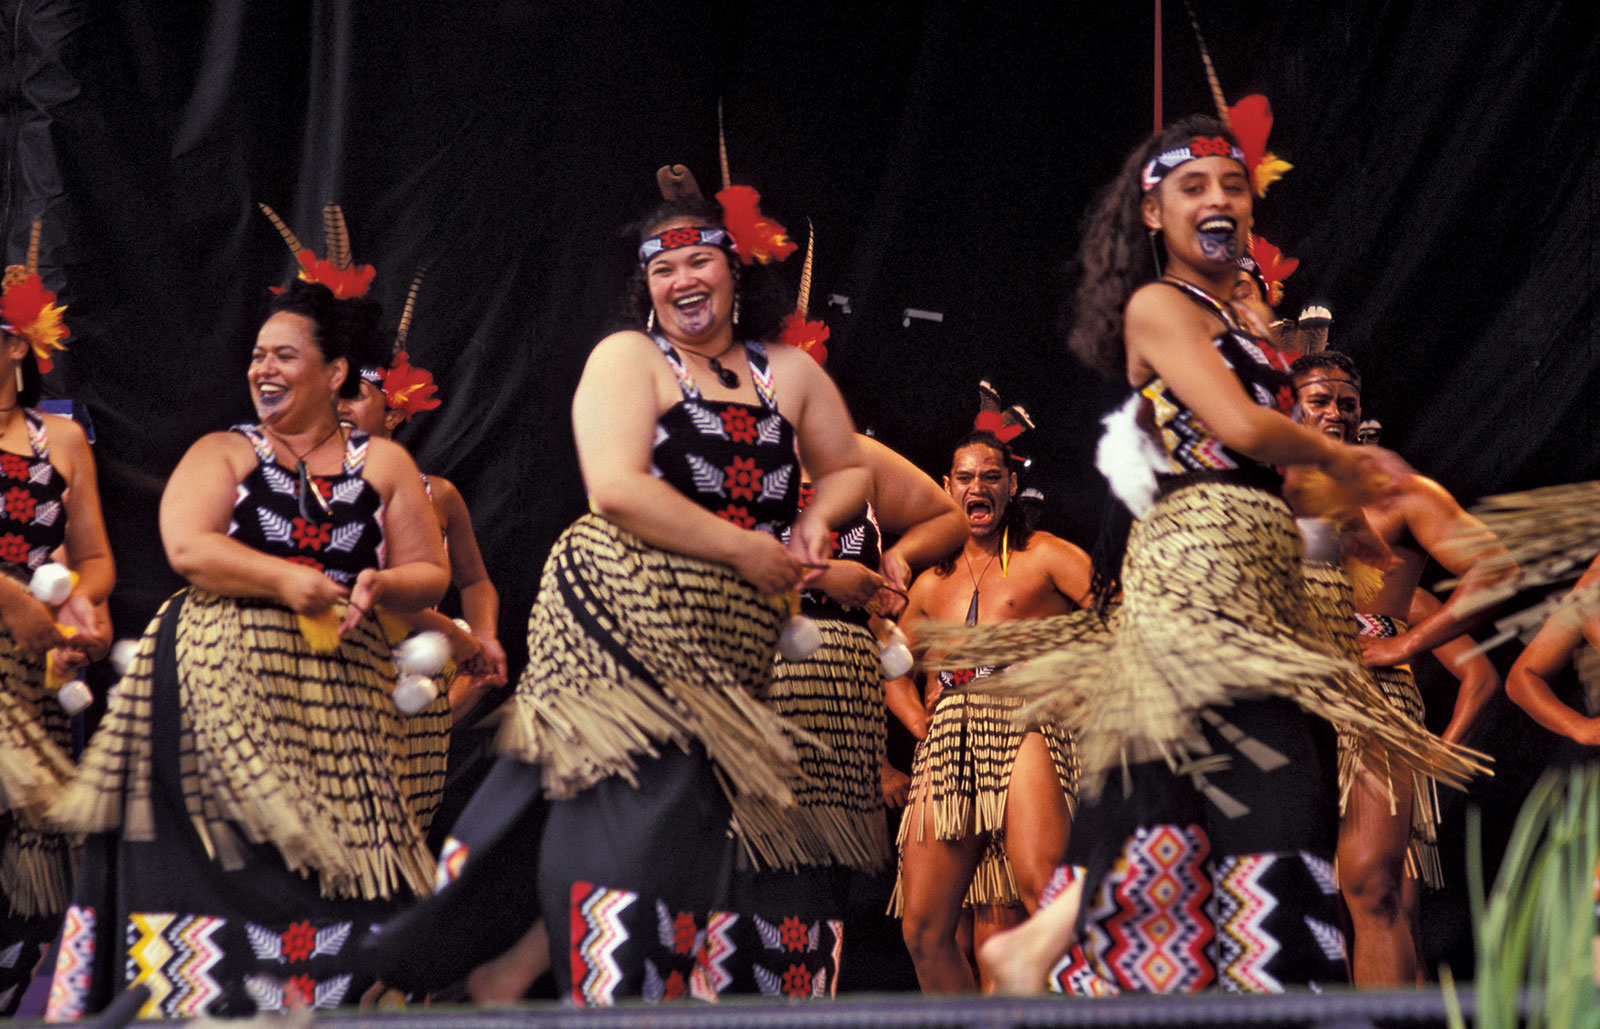 If You Think You Know Lot About World, Prove It by Scoring 15 on This Geography Quiz Maori Kapa Haka Wellington New Zealand